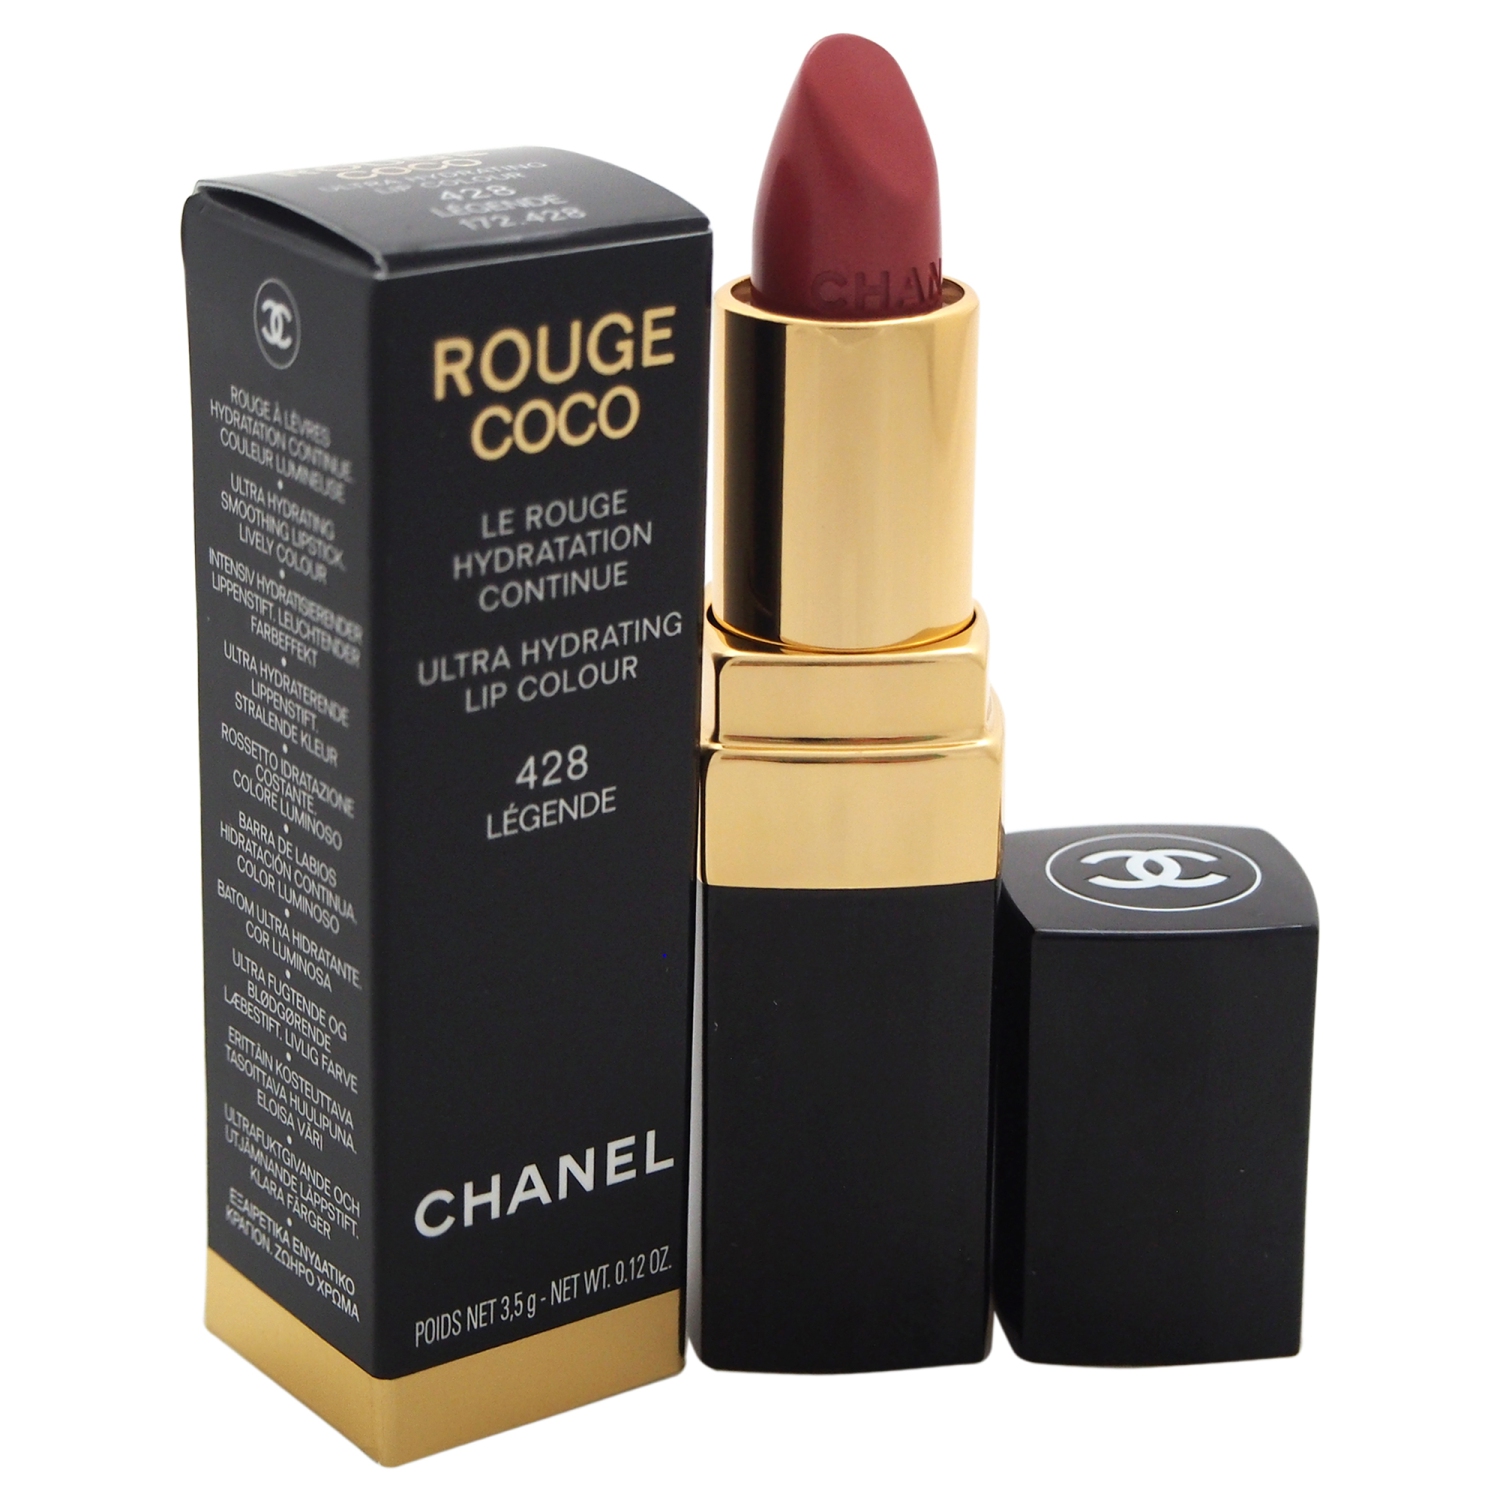 Rouge Coco Shine Hydrating Sheer Lipshine - # 428 Legende by Chanel for Women - 0.11 oz Lipstick (Limited Edition)